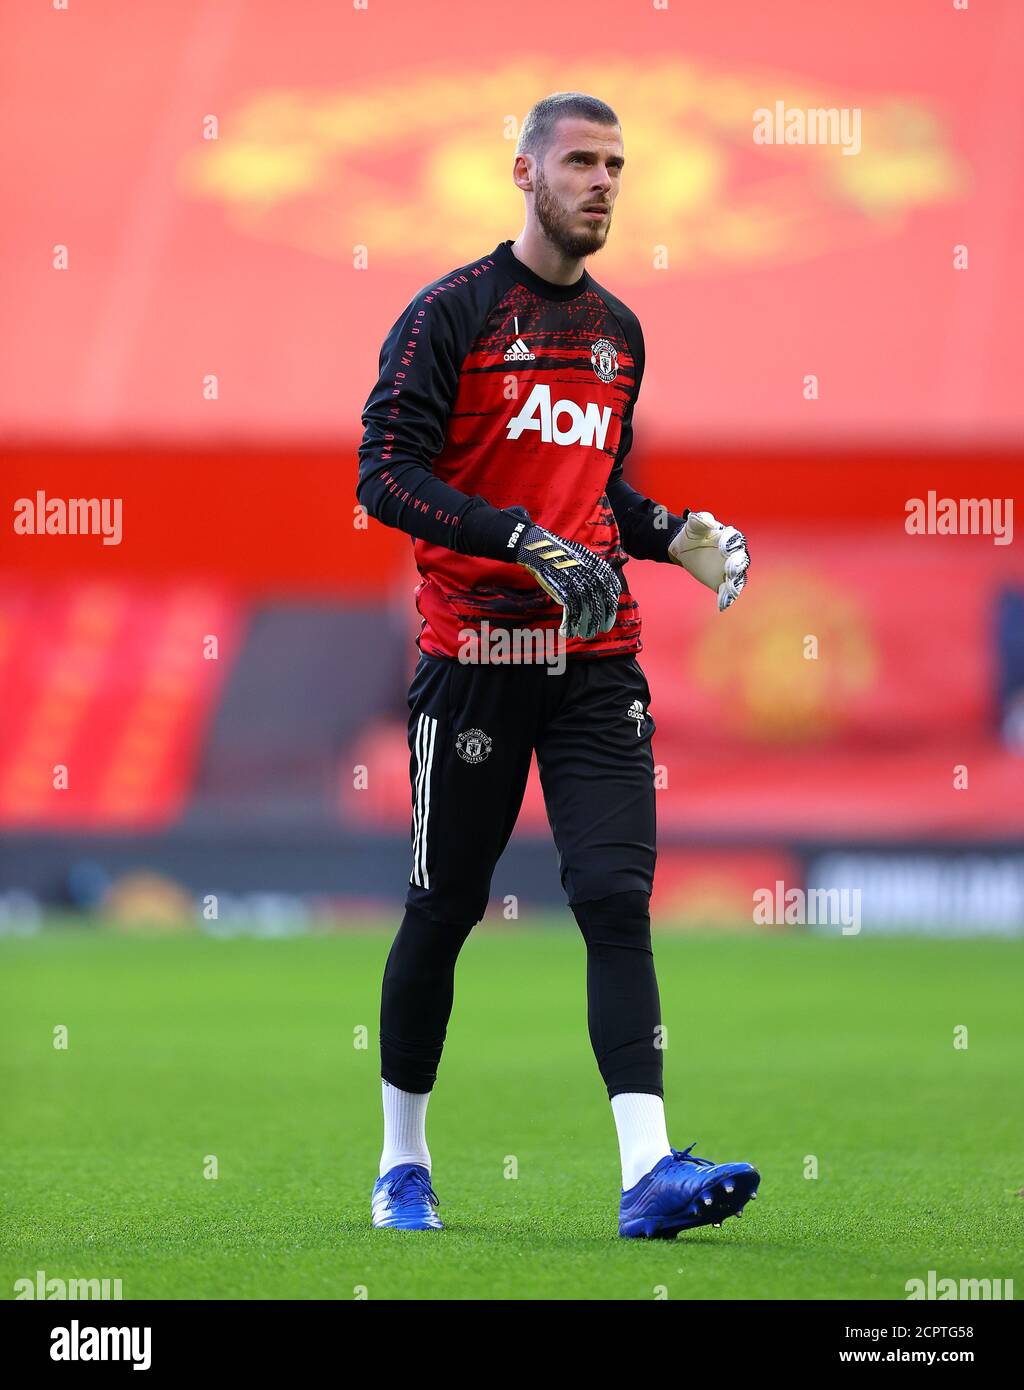 Manchester United goalkeeper David de Gea warming up before the Premier League match at Old Trafford, Manchester. Stock Photo